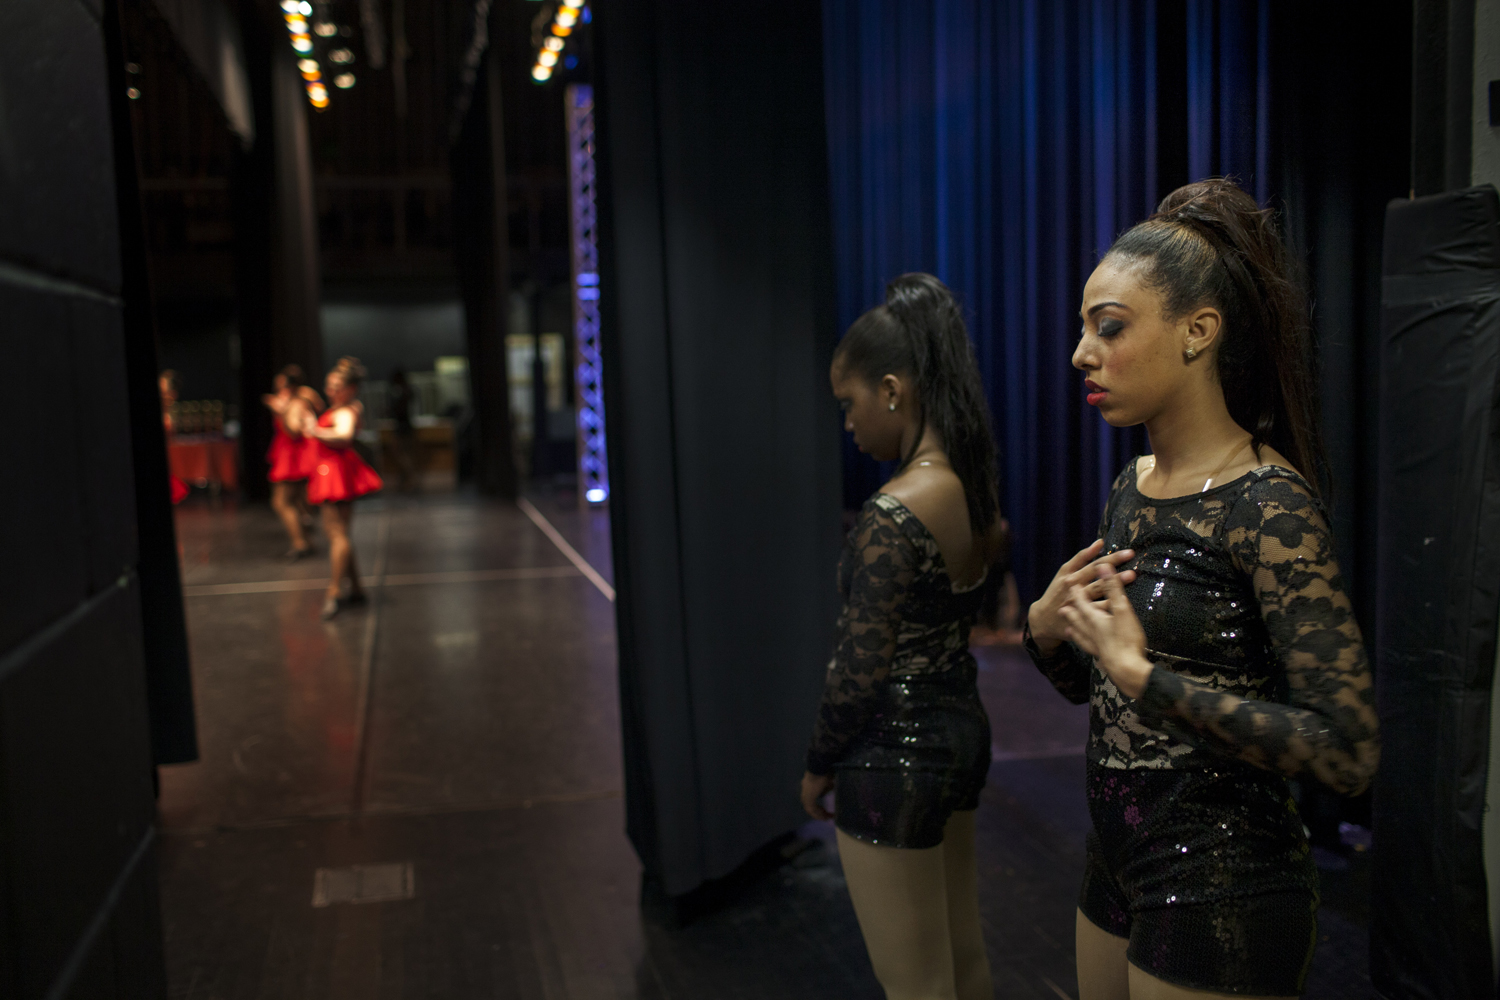 May 4th, 2013. Long Island, New York. Backstage at a dance competition with her dance school's team, Sarah takes a moment to center herself before she performs.